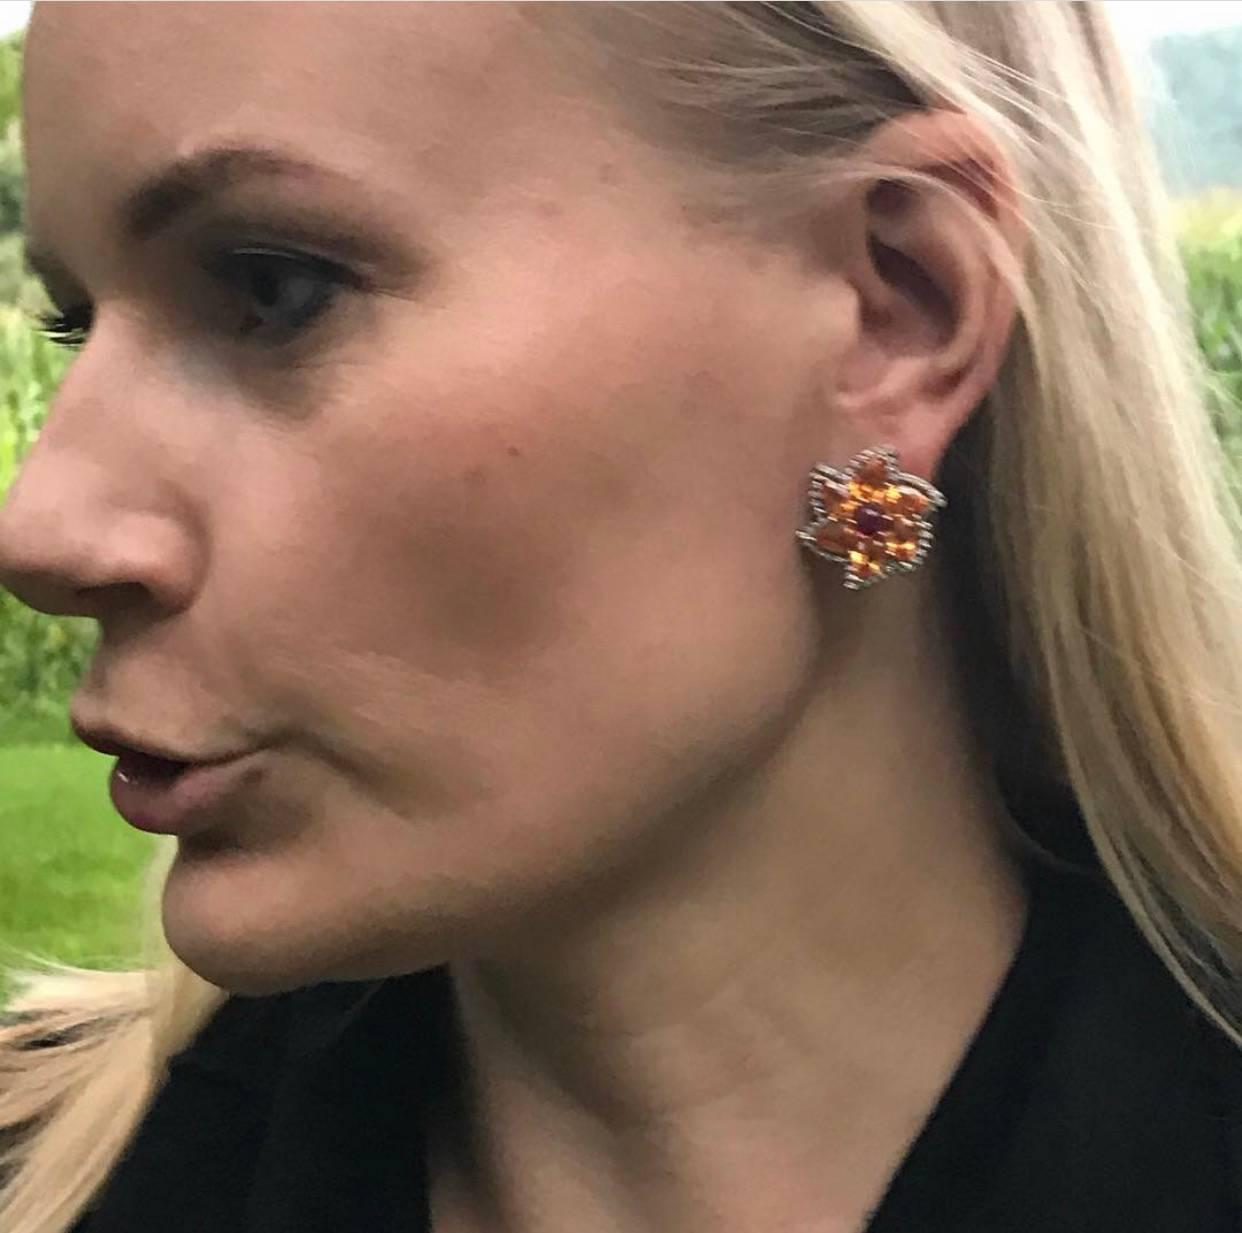 The Fabulous Specitite garnet Earrings with Red Spinel Cabochon Centers, Surrounded by Colorless Diamonds, Black Rhodium Plated, to Emphasize the Movement,  Classy Earrings can be worn for dressy or casual Occasion. Made in NYC,  18 K Gold,